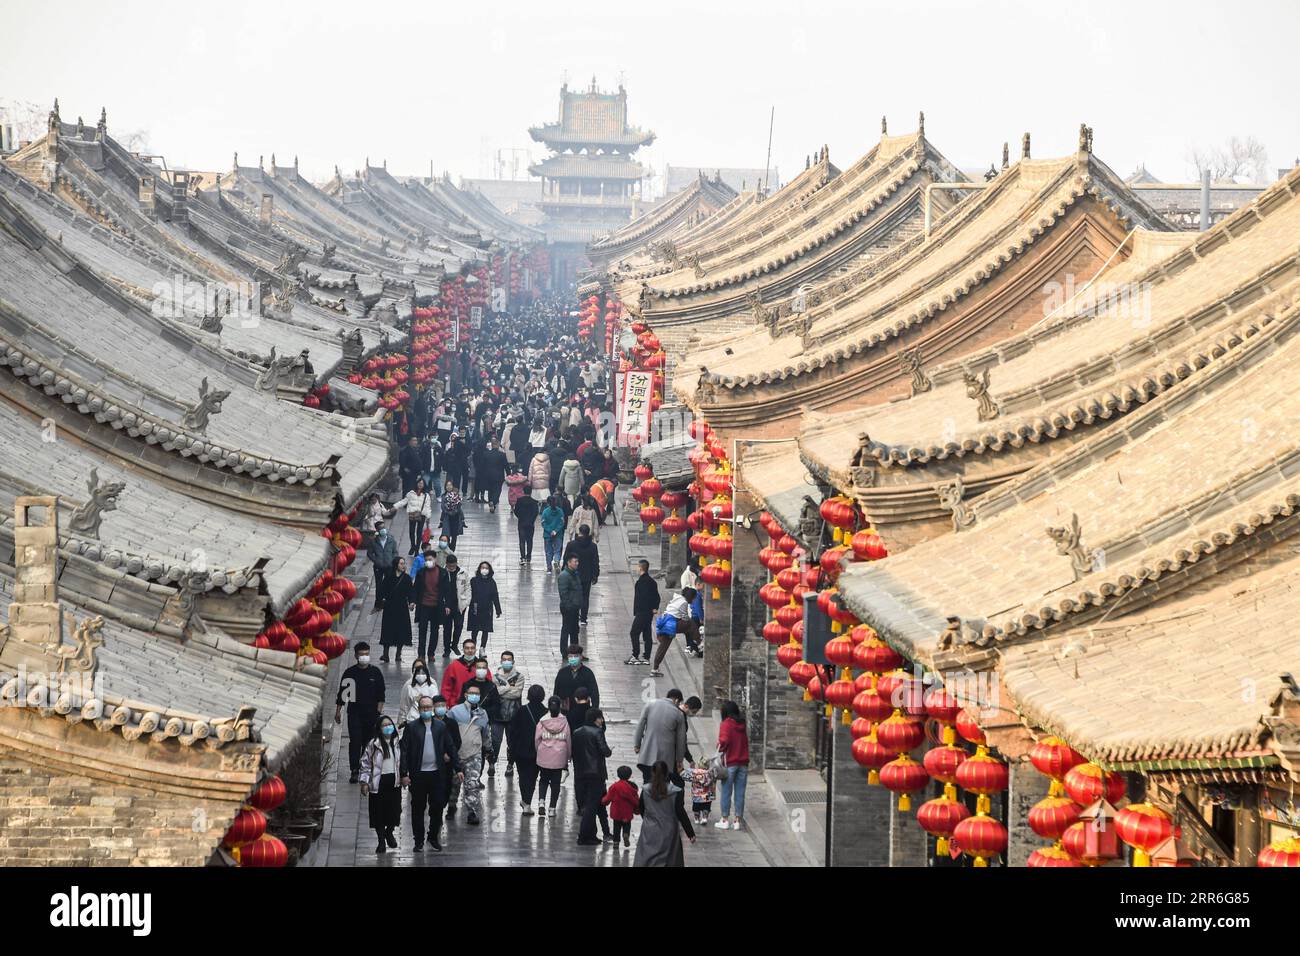 210214 -- BEIJING, Feb. 14, 2021 -- Visitors tour the Pingyao Ancient Town on the first day of the Lunar New Year in Jinzhong, north China s Shanxi Province, Feb. 12, 2021. Photo by /Xinhua XINHUA PHOTOS OF THE DAY LiangxShengren PUBLICATIONxNOTxINxCHN Stock Photo